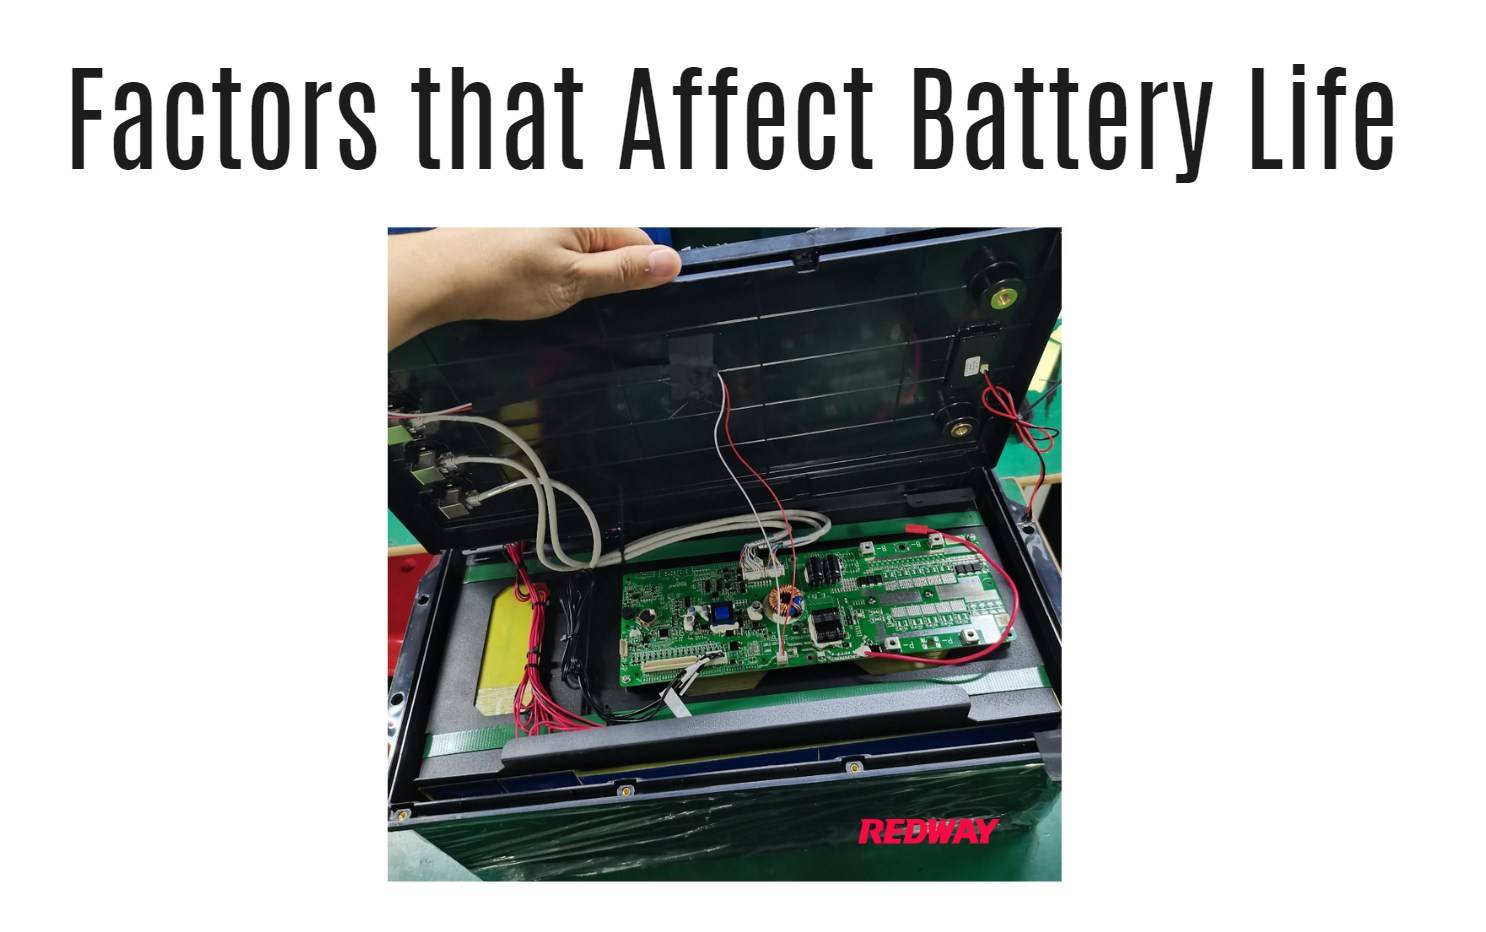 Factors that Affect Battery Life. lithium battery oem factory redway 12v series